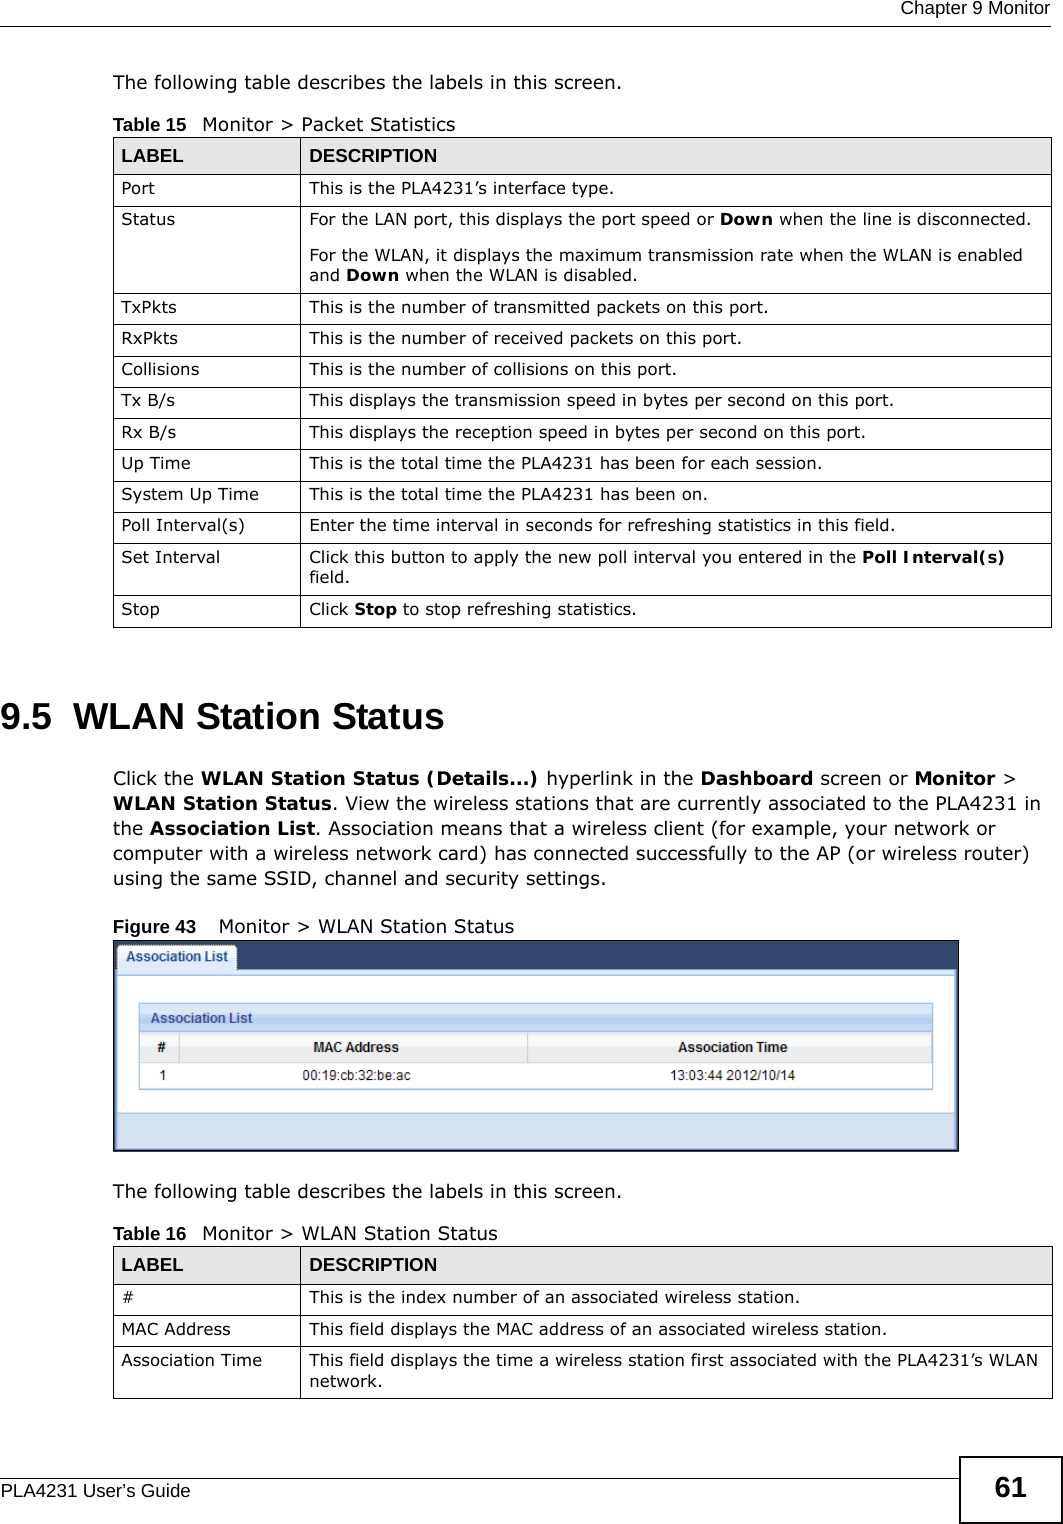  Chapter 9 MonitorPLA4231 User’s Guide 61The following table describes the labels in this screen.9.5  WLAN Station Status     Click the WLAN Station Status (Details...) hyperlink in the Dashboard screen or Monitor &gt; WLAN Station Status. View the wireless stations that are currently associated to the PLA4231 in the Association List. Association means that a wireless client (for example, your network or computer with a wireless network card) has connected successfully to the AP (or wireless router) using the same SSID, channel and security settings.Figure 43    Monitor &gt; WLAN Station Status The following table describes the labels in this screen.Table 15   Monitor &gt; Packet StatisticsLABEL DESCRIPTIONPort This is the PLA4231’s interface type.Status  For the LAN port, this displays the port speed or Down when the line is disconnected.For the WLAN, it displays the maximum transmission rate when the WLAN is enabled and Down when the WLAN is disabled.TxPkts  This is the number of transmitted packets on this port.RxPkts  This is the number of received packets on this port.Collisions  This is the number of collisions on this port.Tx B/s  This displays the transmission speed in bytes per second on this port.Rx B/s This displays the reception speed in bytes per second on this port.Up Time This is the total time the PLA4231 has been for each session.System Up Time This is the total time the PLA4231 has been on.Poll Interval(s) Enter the time interval in seconds for refreshing statistics in this field.Set Interval Click this button to apply the new poll interval you entered in the Poll Interval(s) field.Stop Click Stop to stop refreshing statistics.Table 16   Monitor &gt; WLAN Station StatusLABEL DESCRIPTION#  This is the index number of an associated wireless station. MAC Address  This field displays the MAC address of an associated wireless station.Association Time This field displays the time a wireless station first associated with the PLA4231’s WLAN network.